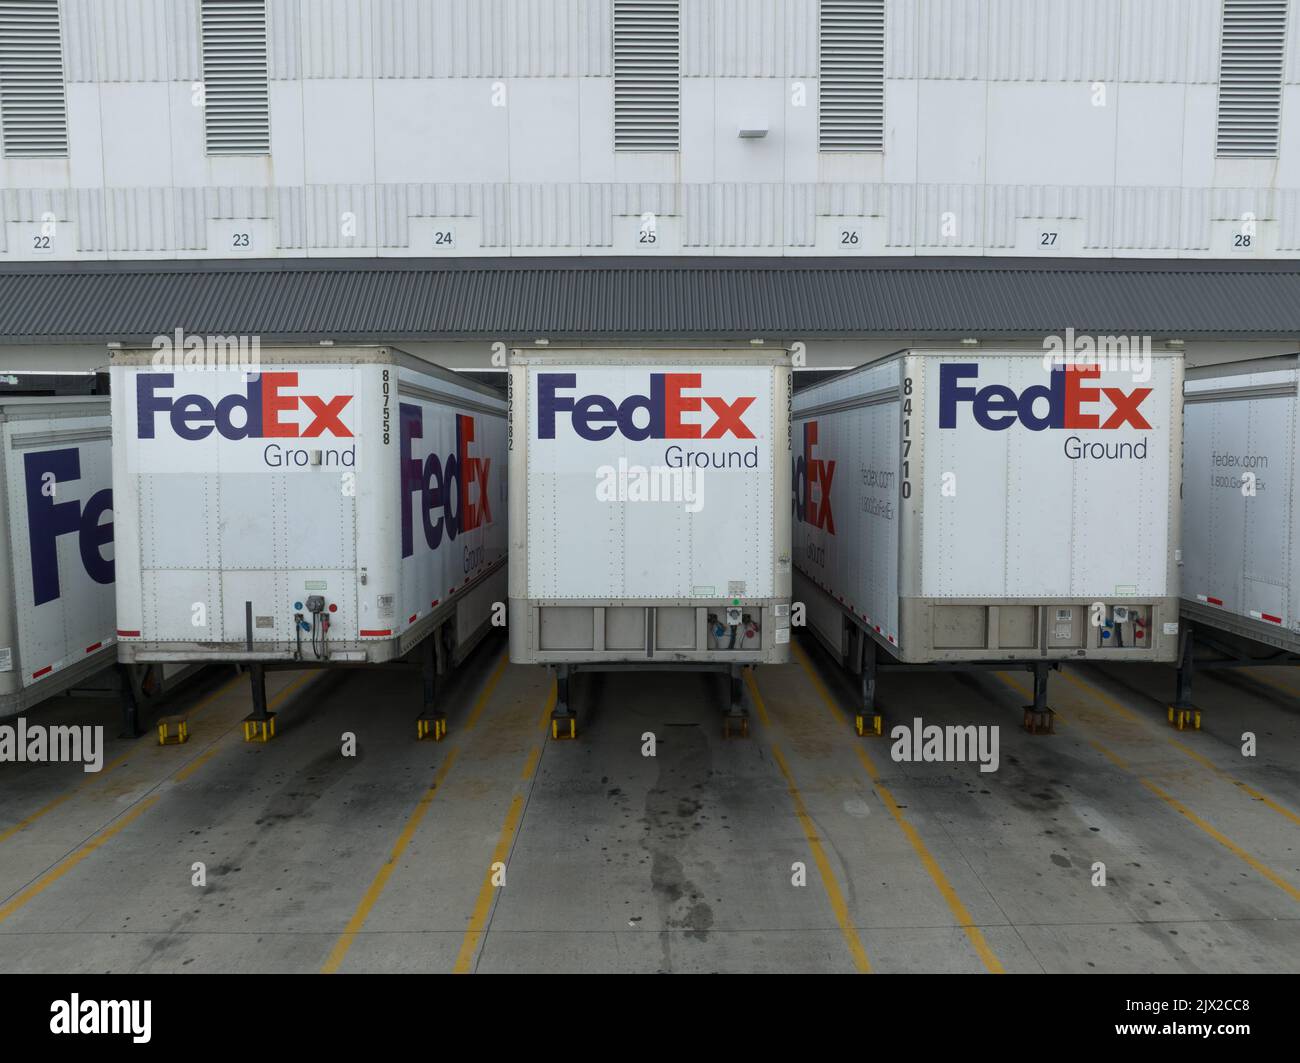 A closeup view of FedEx transport trailers while docked at a Federal Express shipping terminal; the FedEx logo is seen on each trailer. Stock Photo